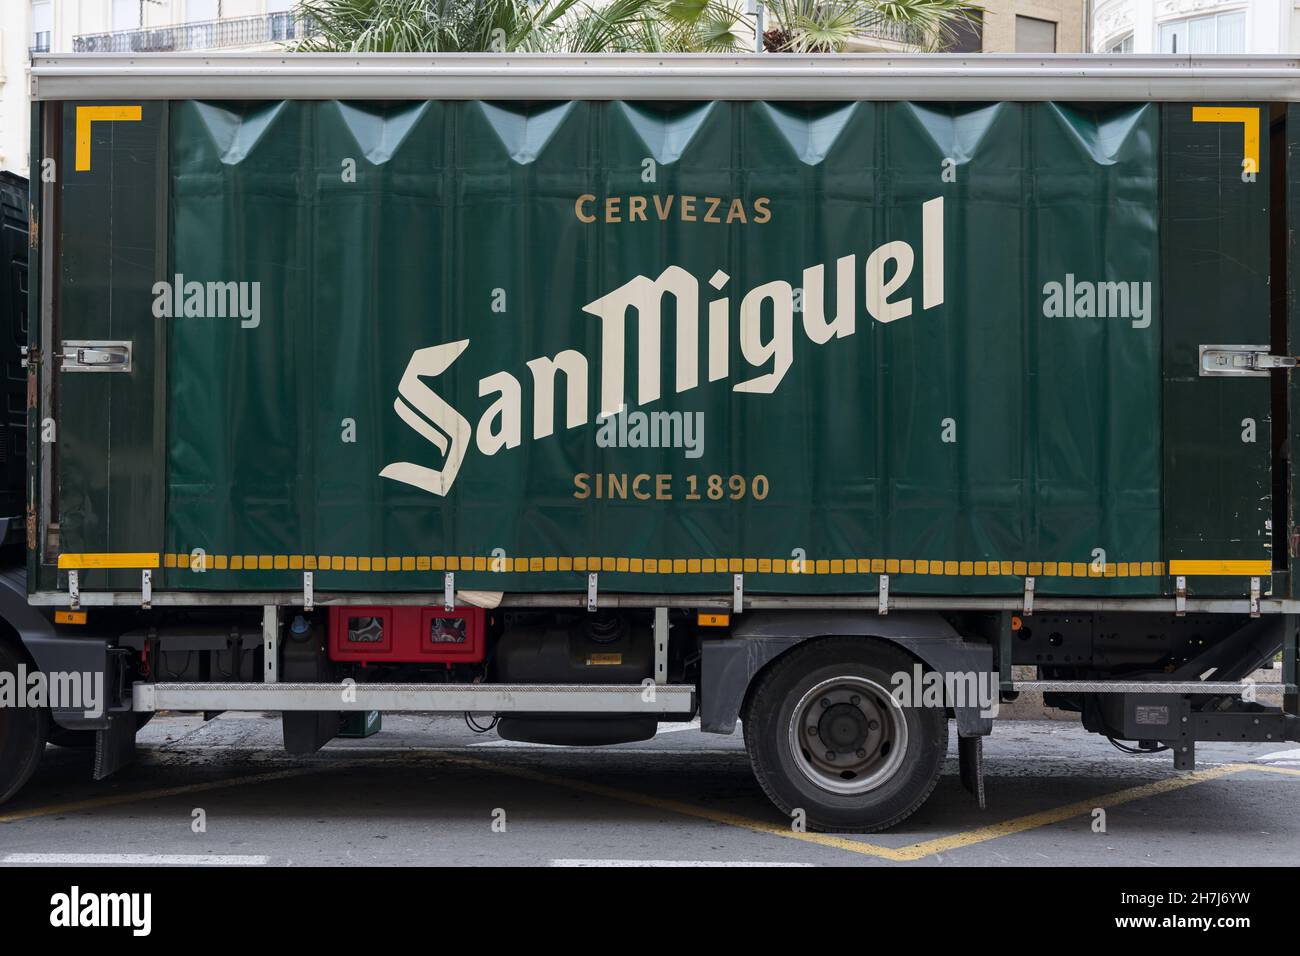 VALENCIA, SPAIN - NOVEMBER 19, 2021: San Miguel is a Spanish brewing company based in Malaga, Andalucia, Spain Stock Photo